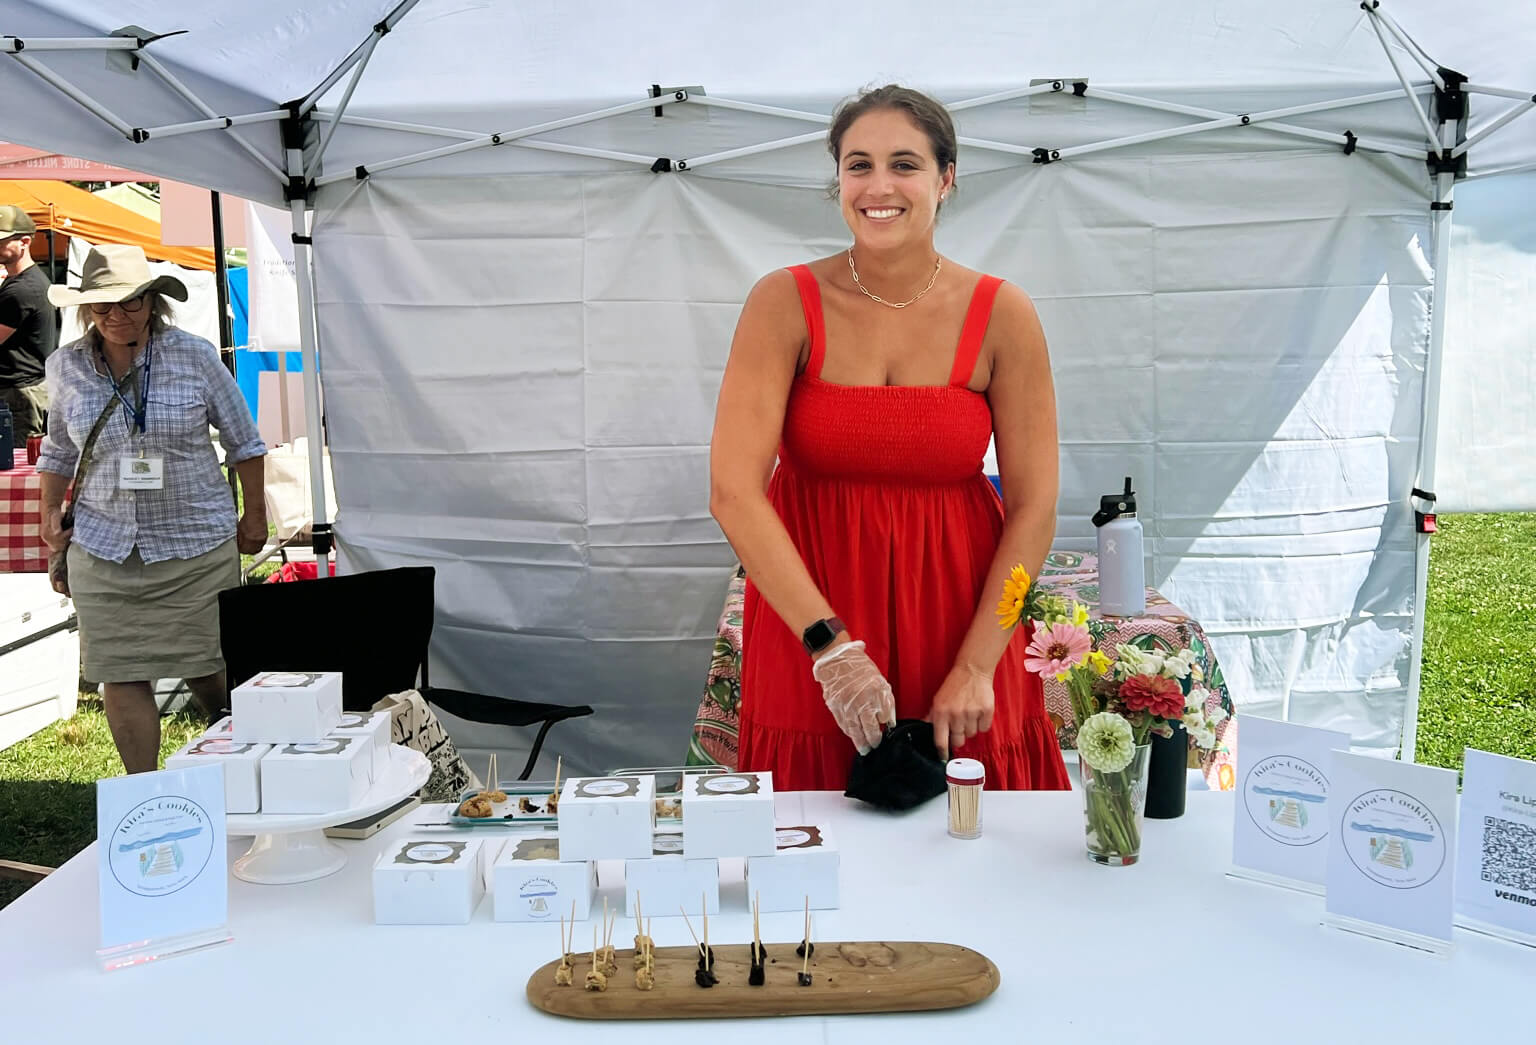 Kira Lipp enjoys bringing her delicious Kira's Cookies to East End farmers markets